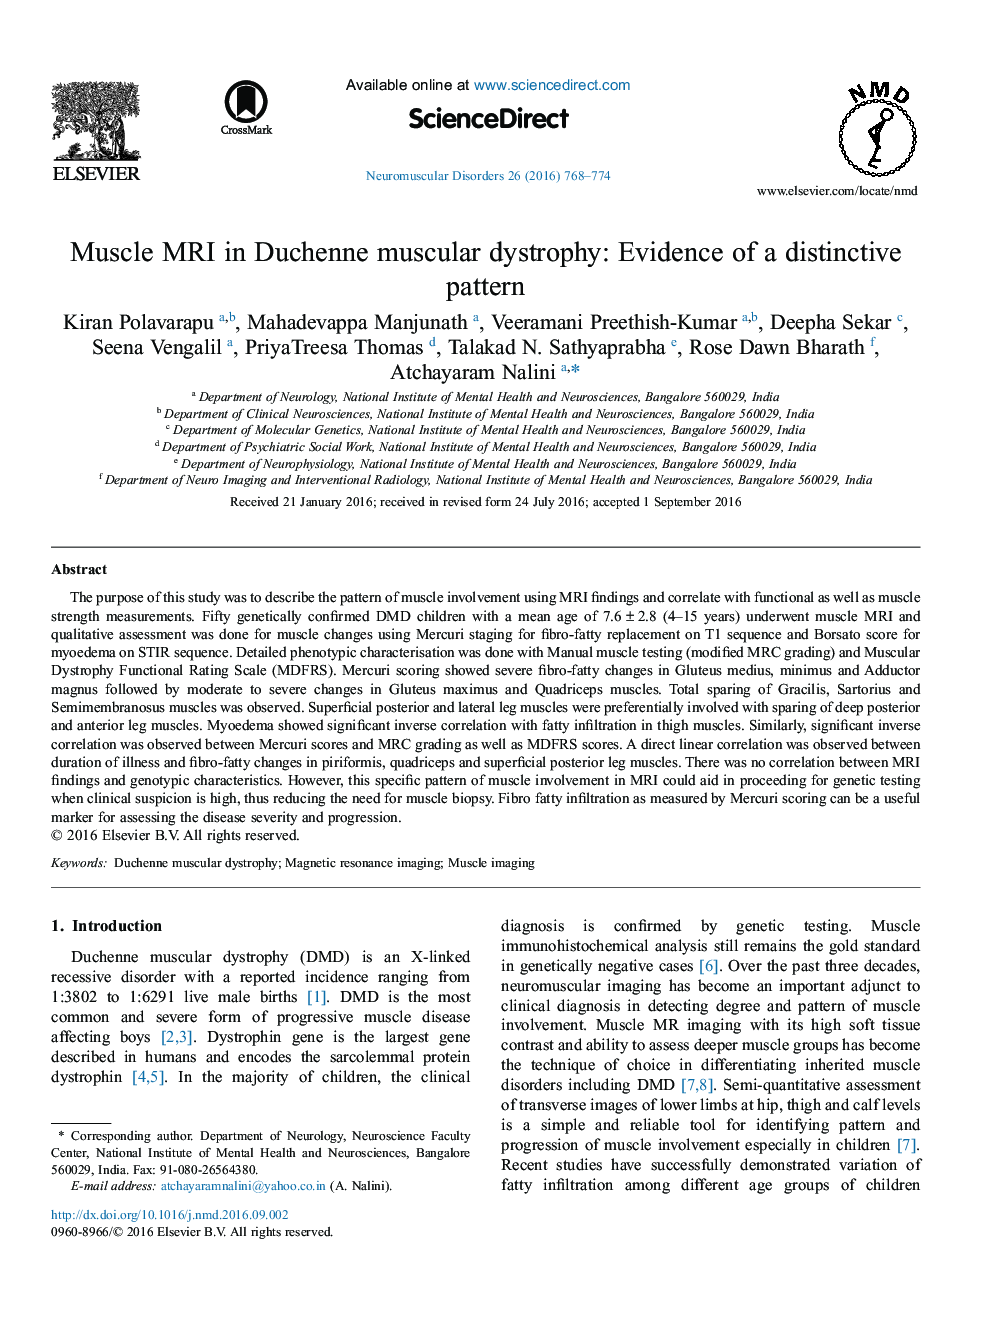 Muscle MRI in Duchenne muscular dystrophy: Evidence of a distinctive pattern